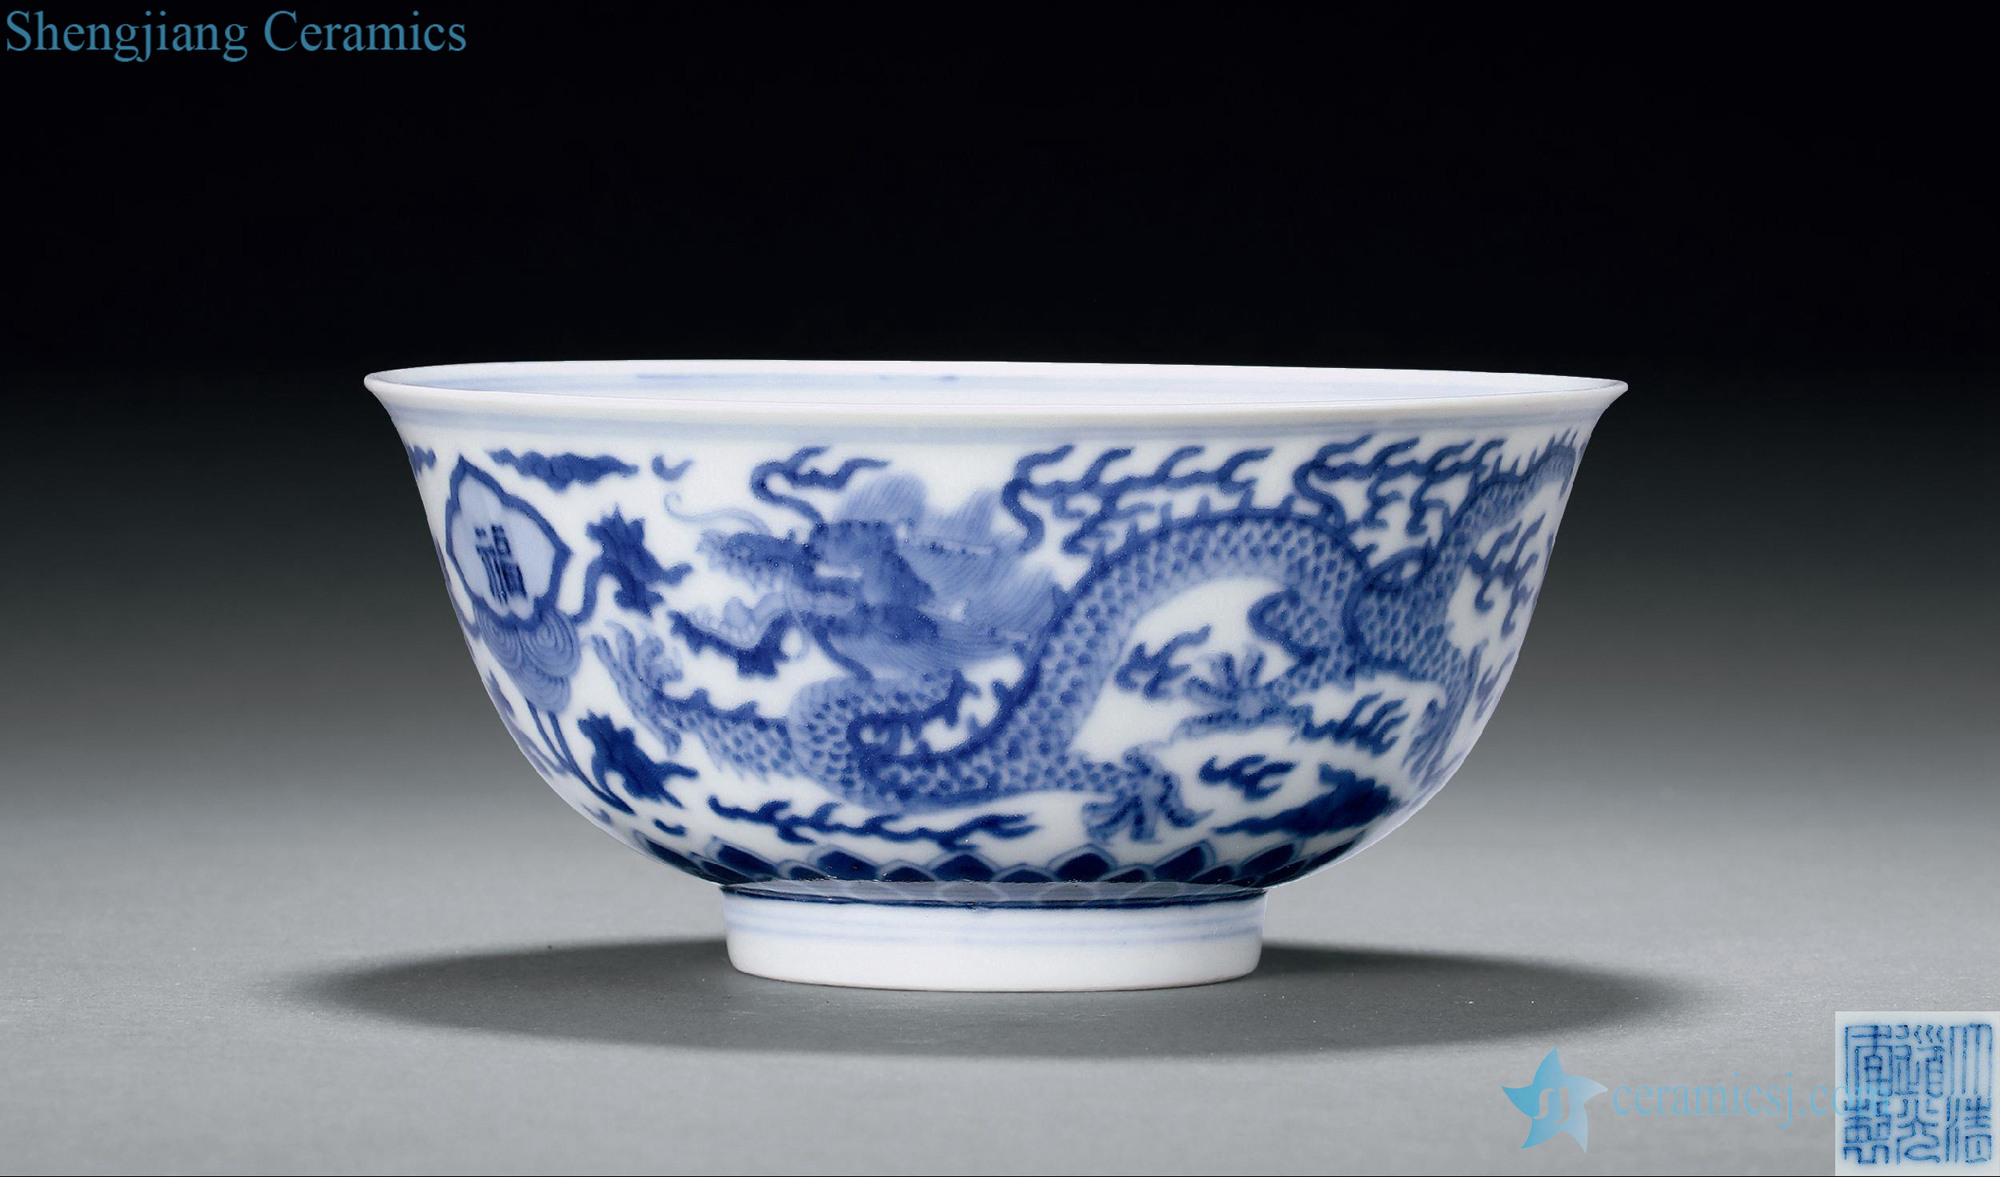 Qing daoguang Blue and white dragon long-lived words green-splashed bowls